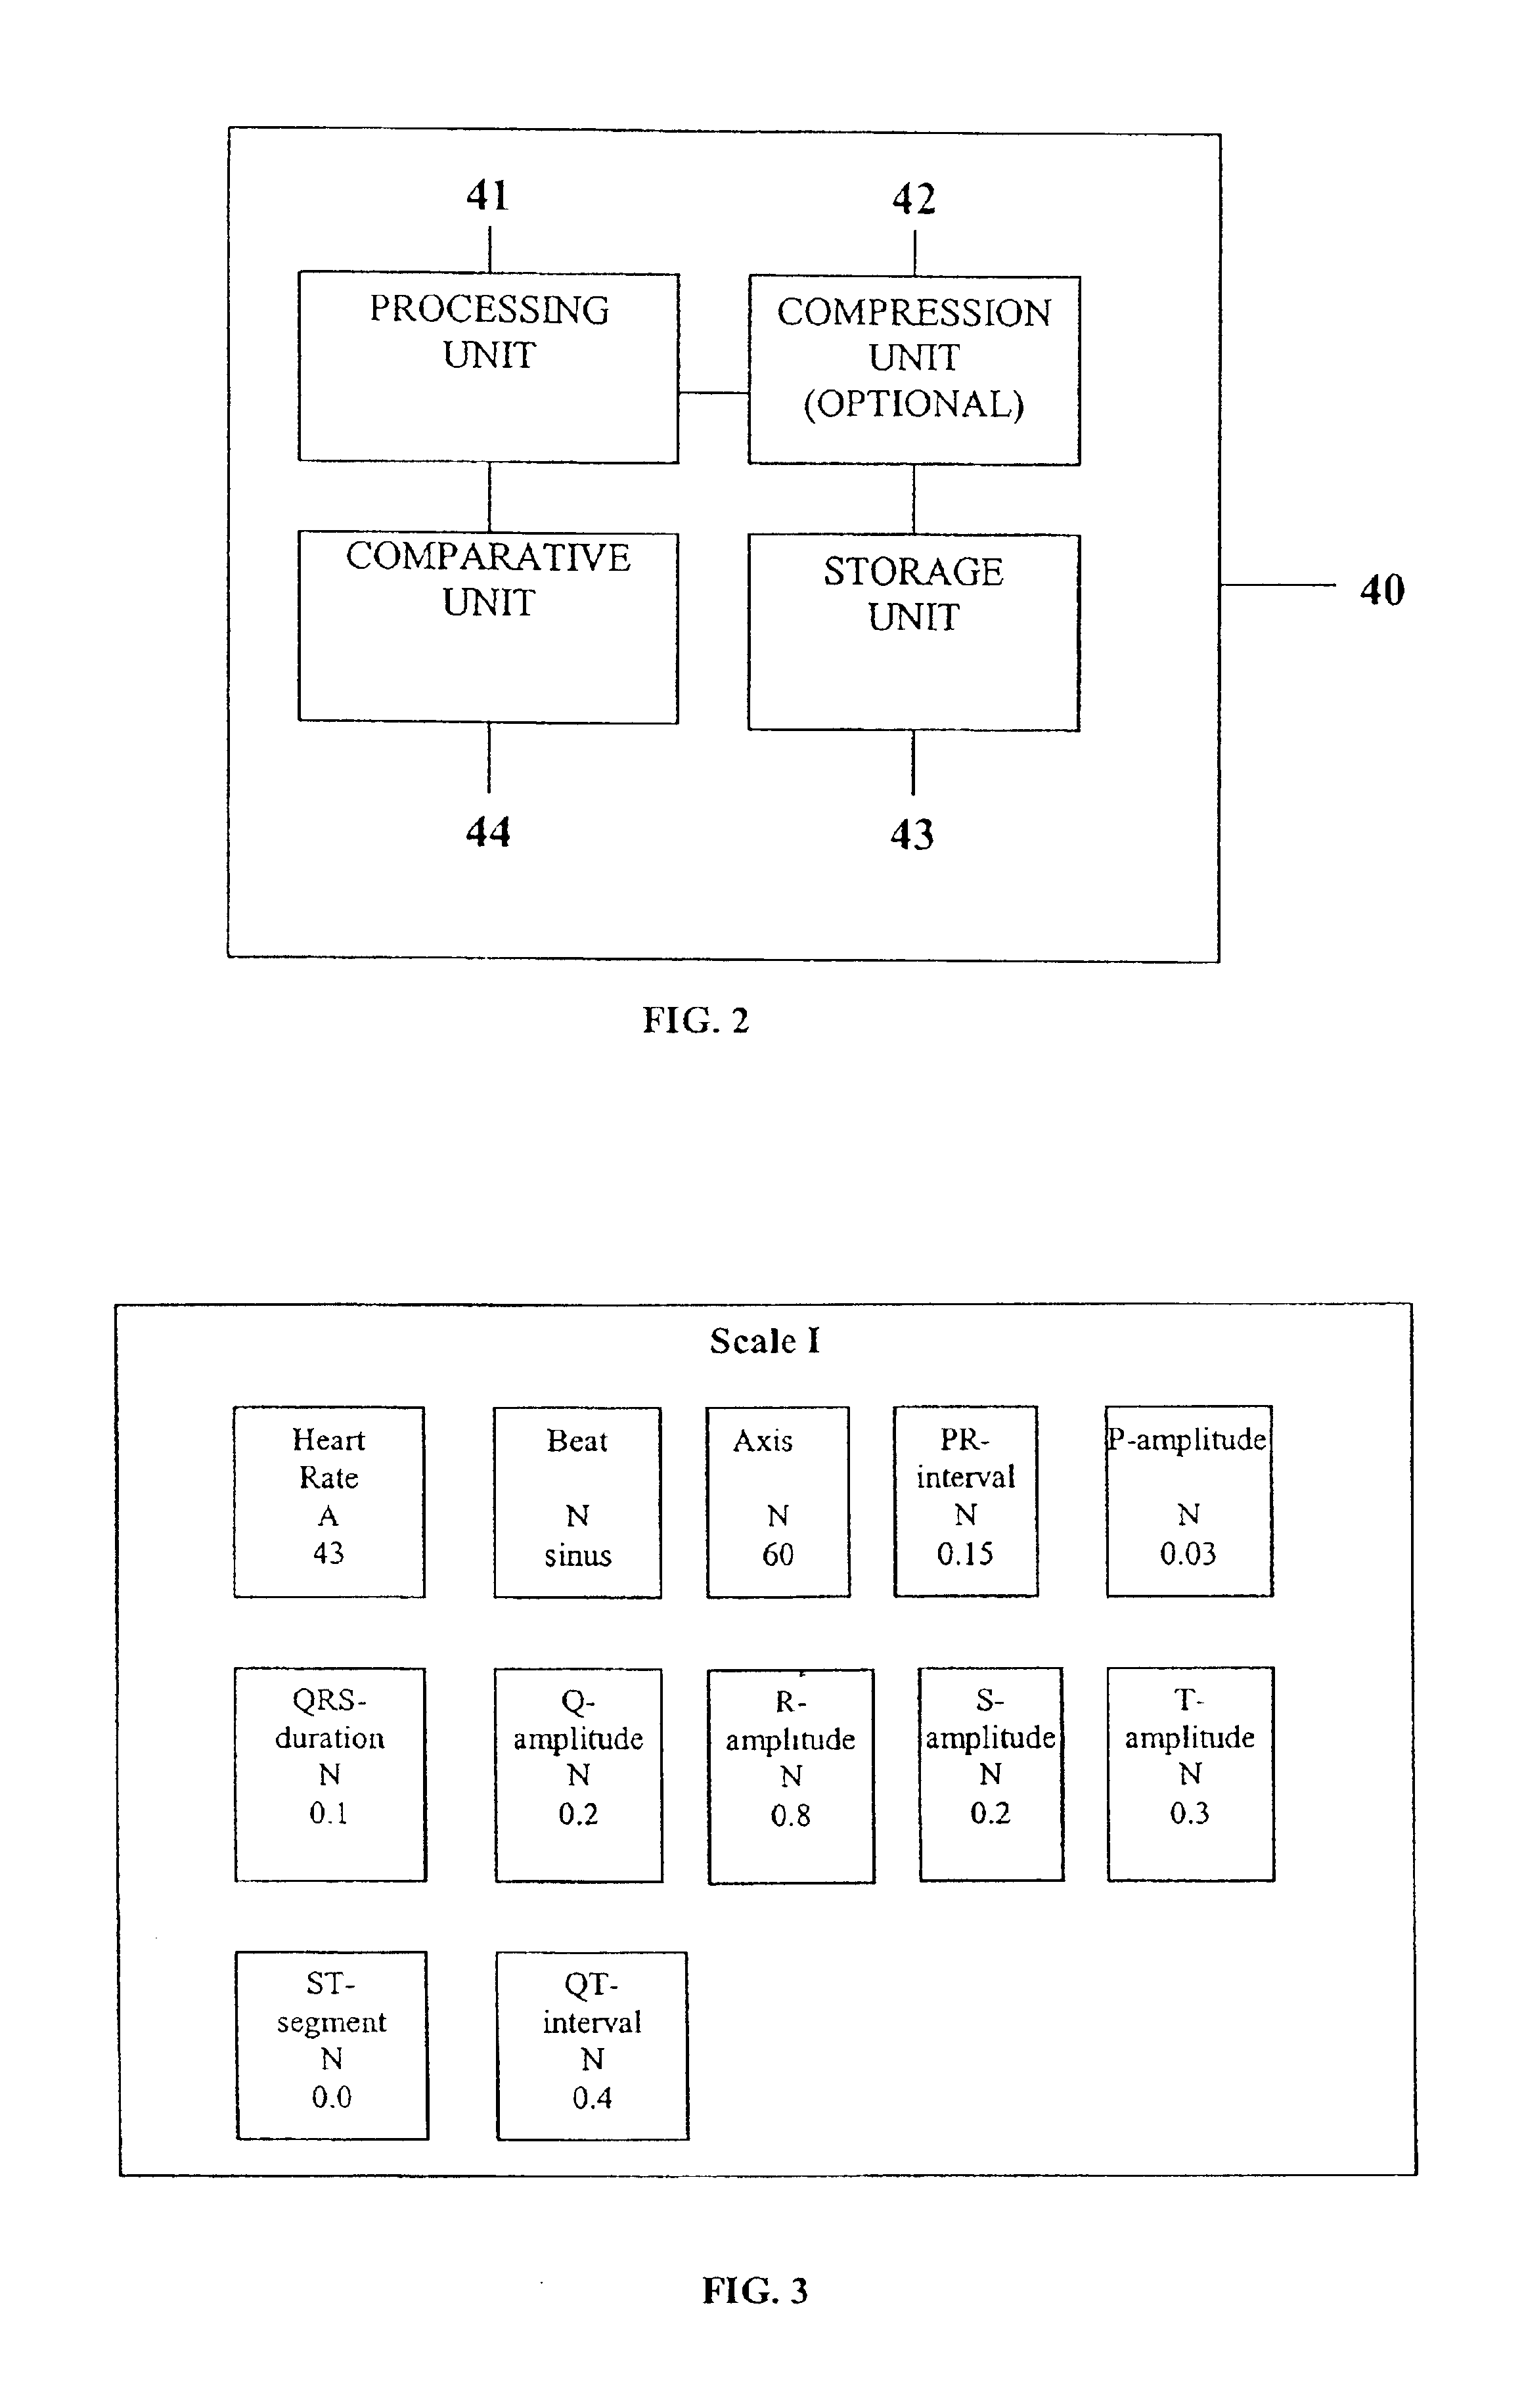 System and device for multi-scale analysis and representation of physiological data